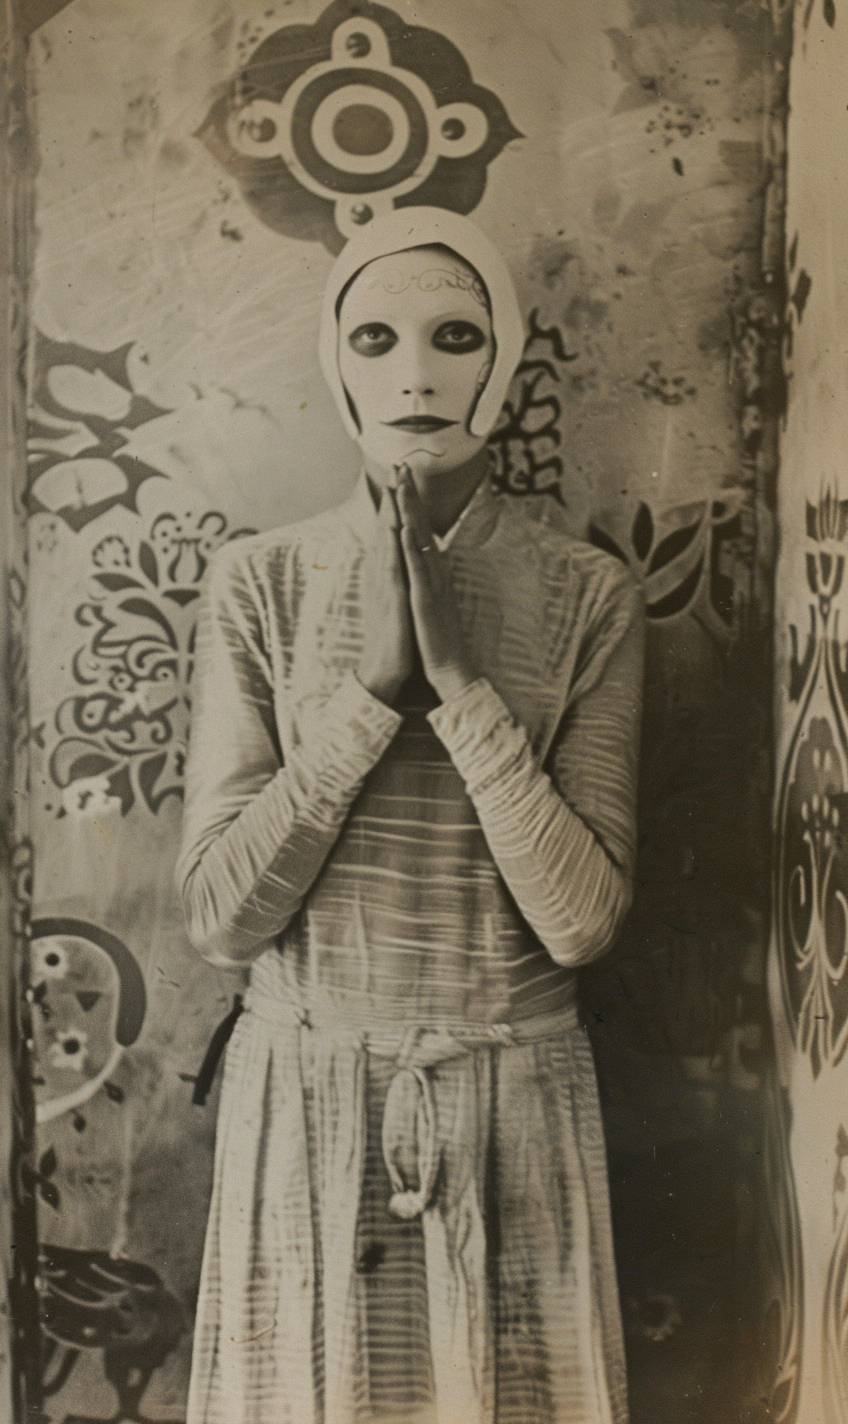 Claude Cahun's photograph depicting George Tooker's painting